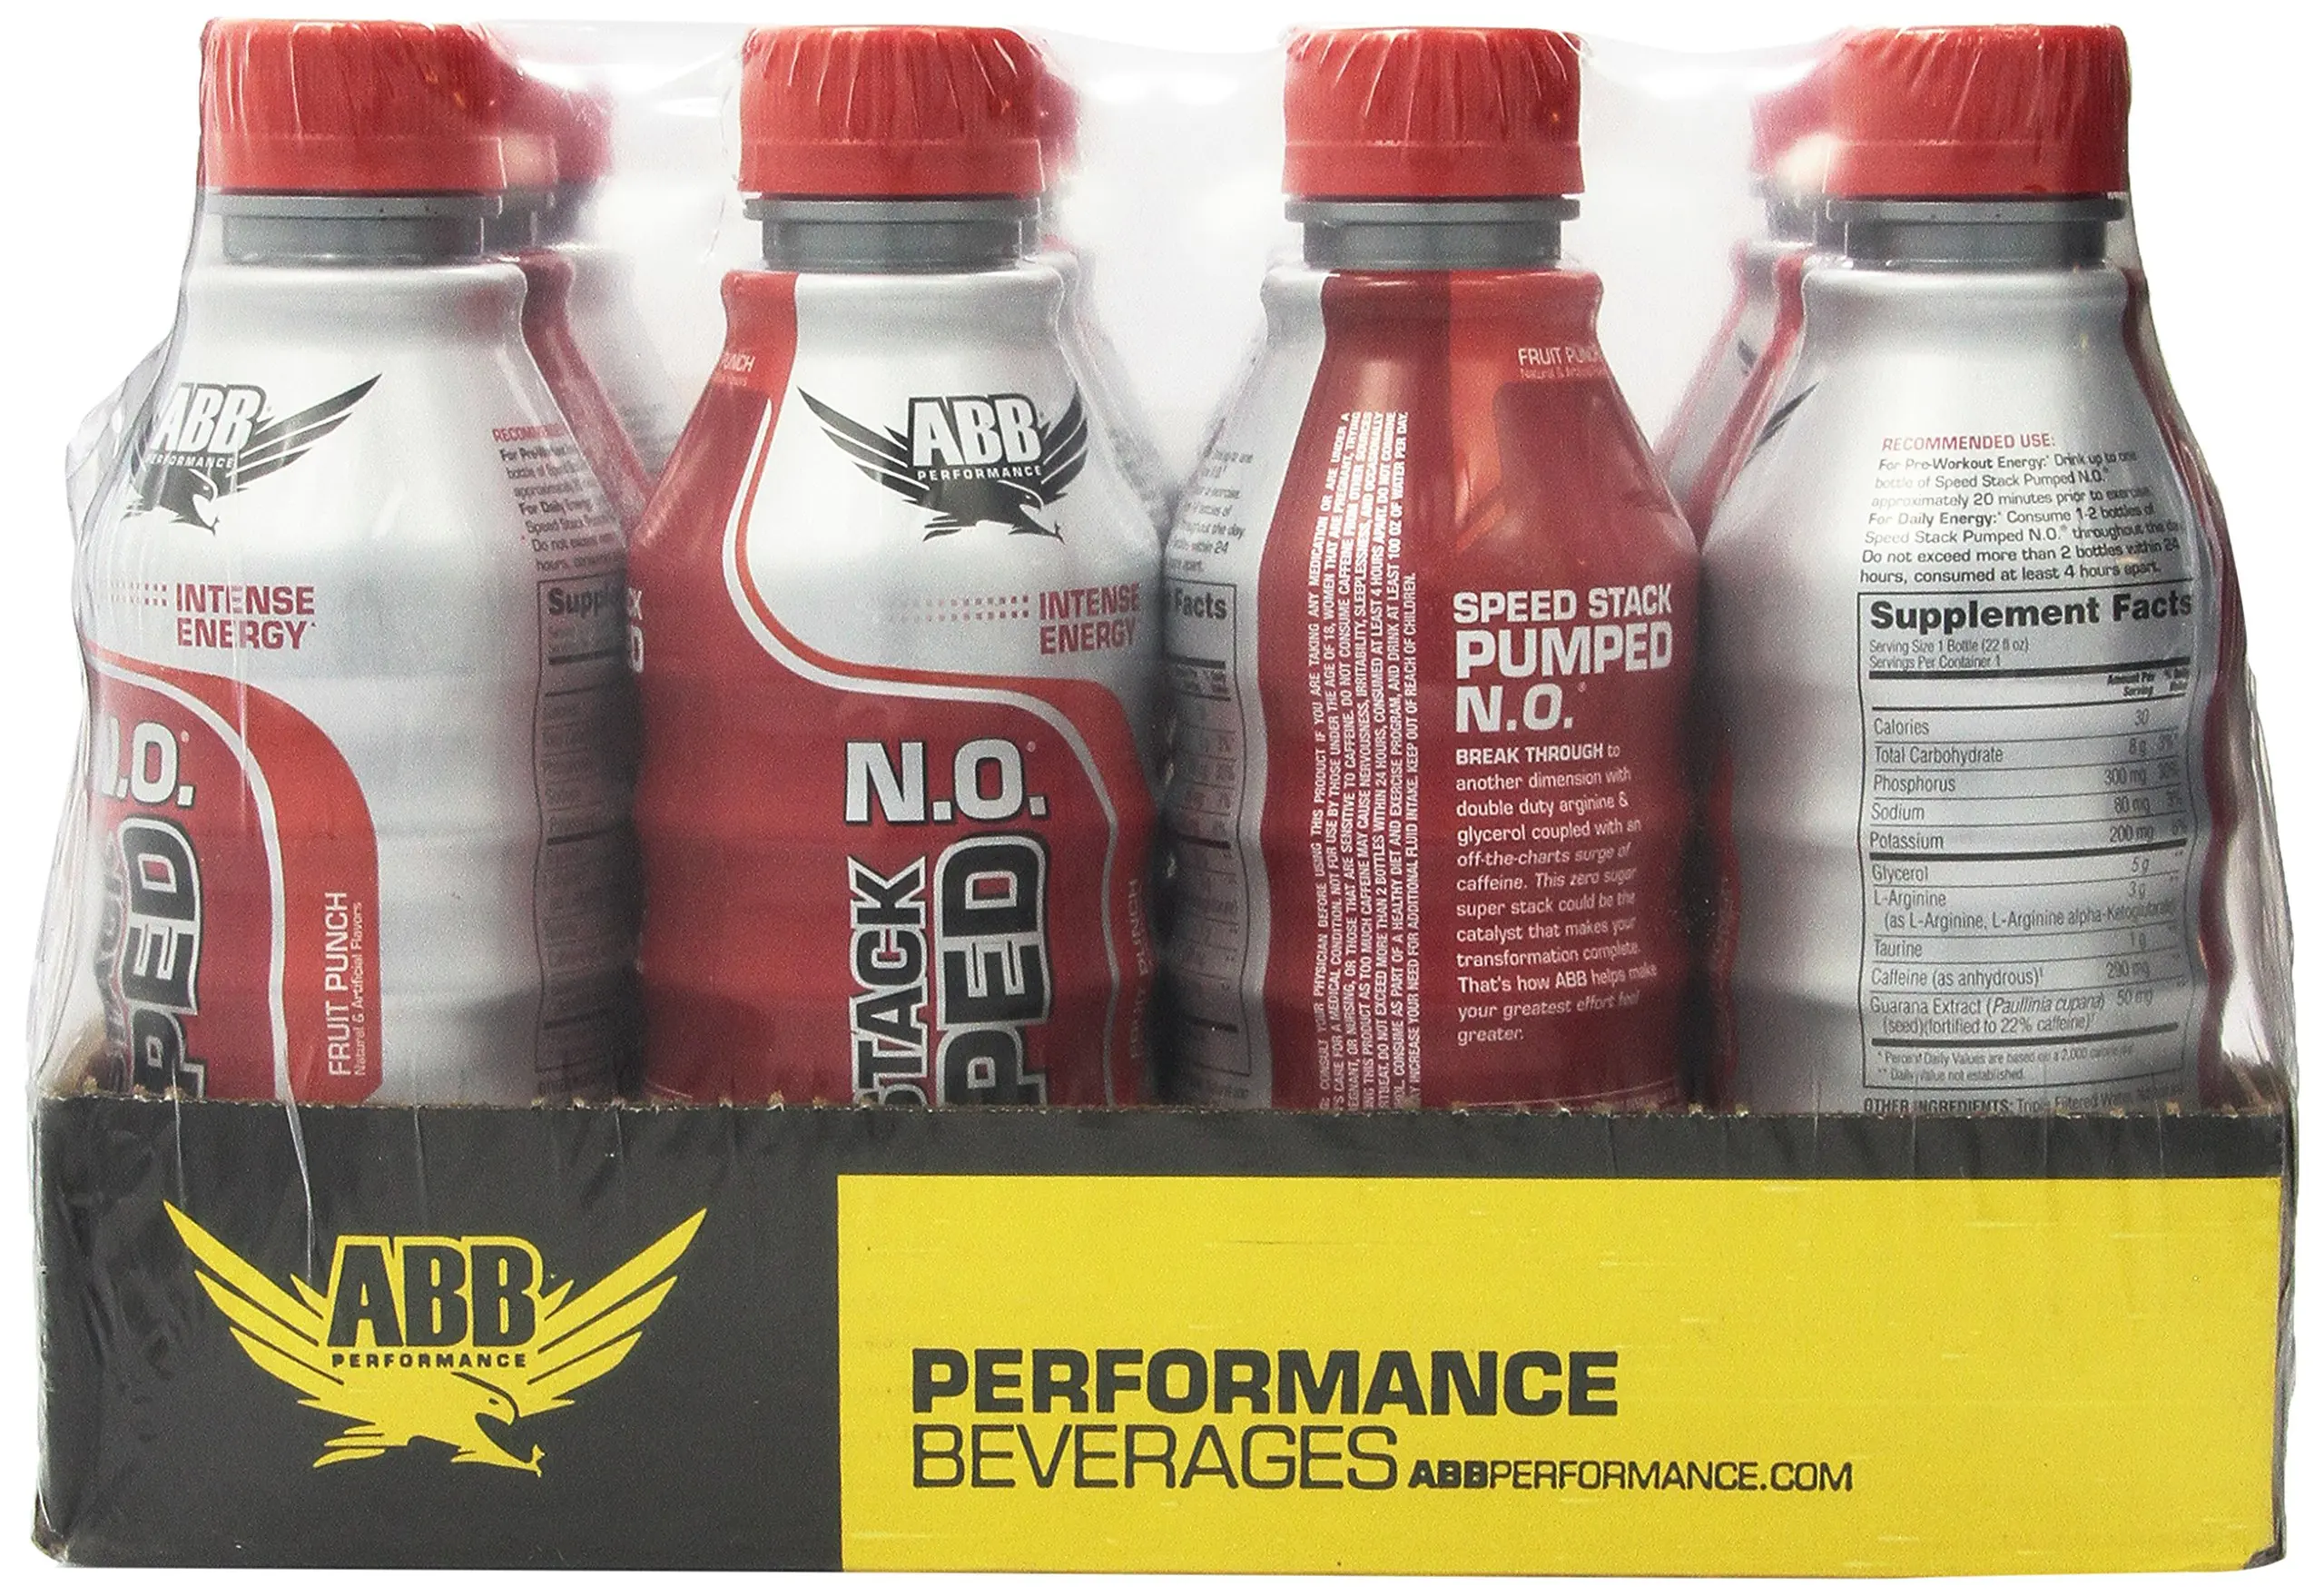 Cheap abb nutrition, find abb nutrition deals on line at Alibaba.com.